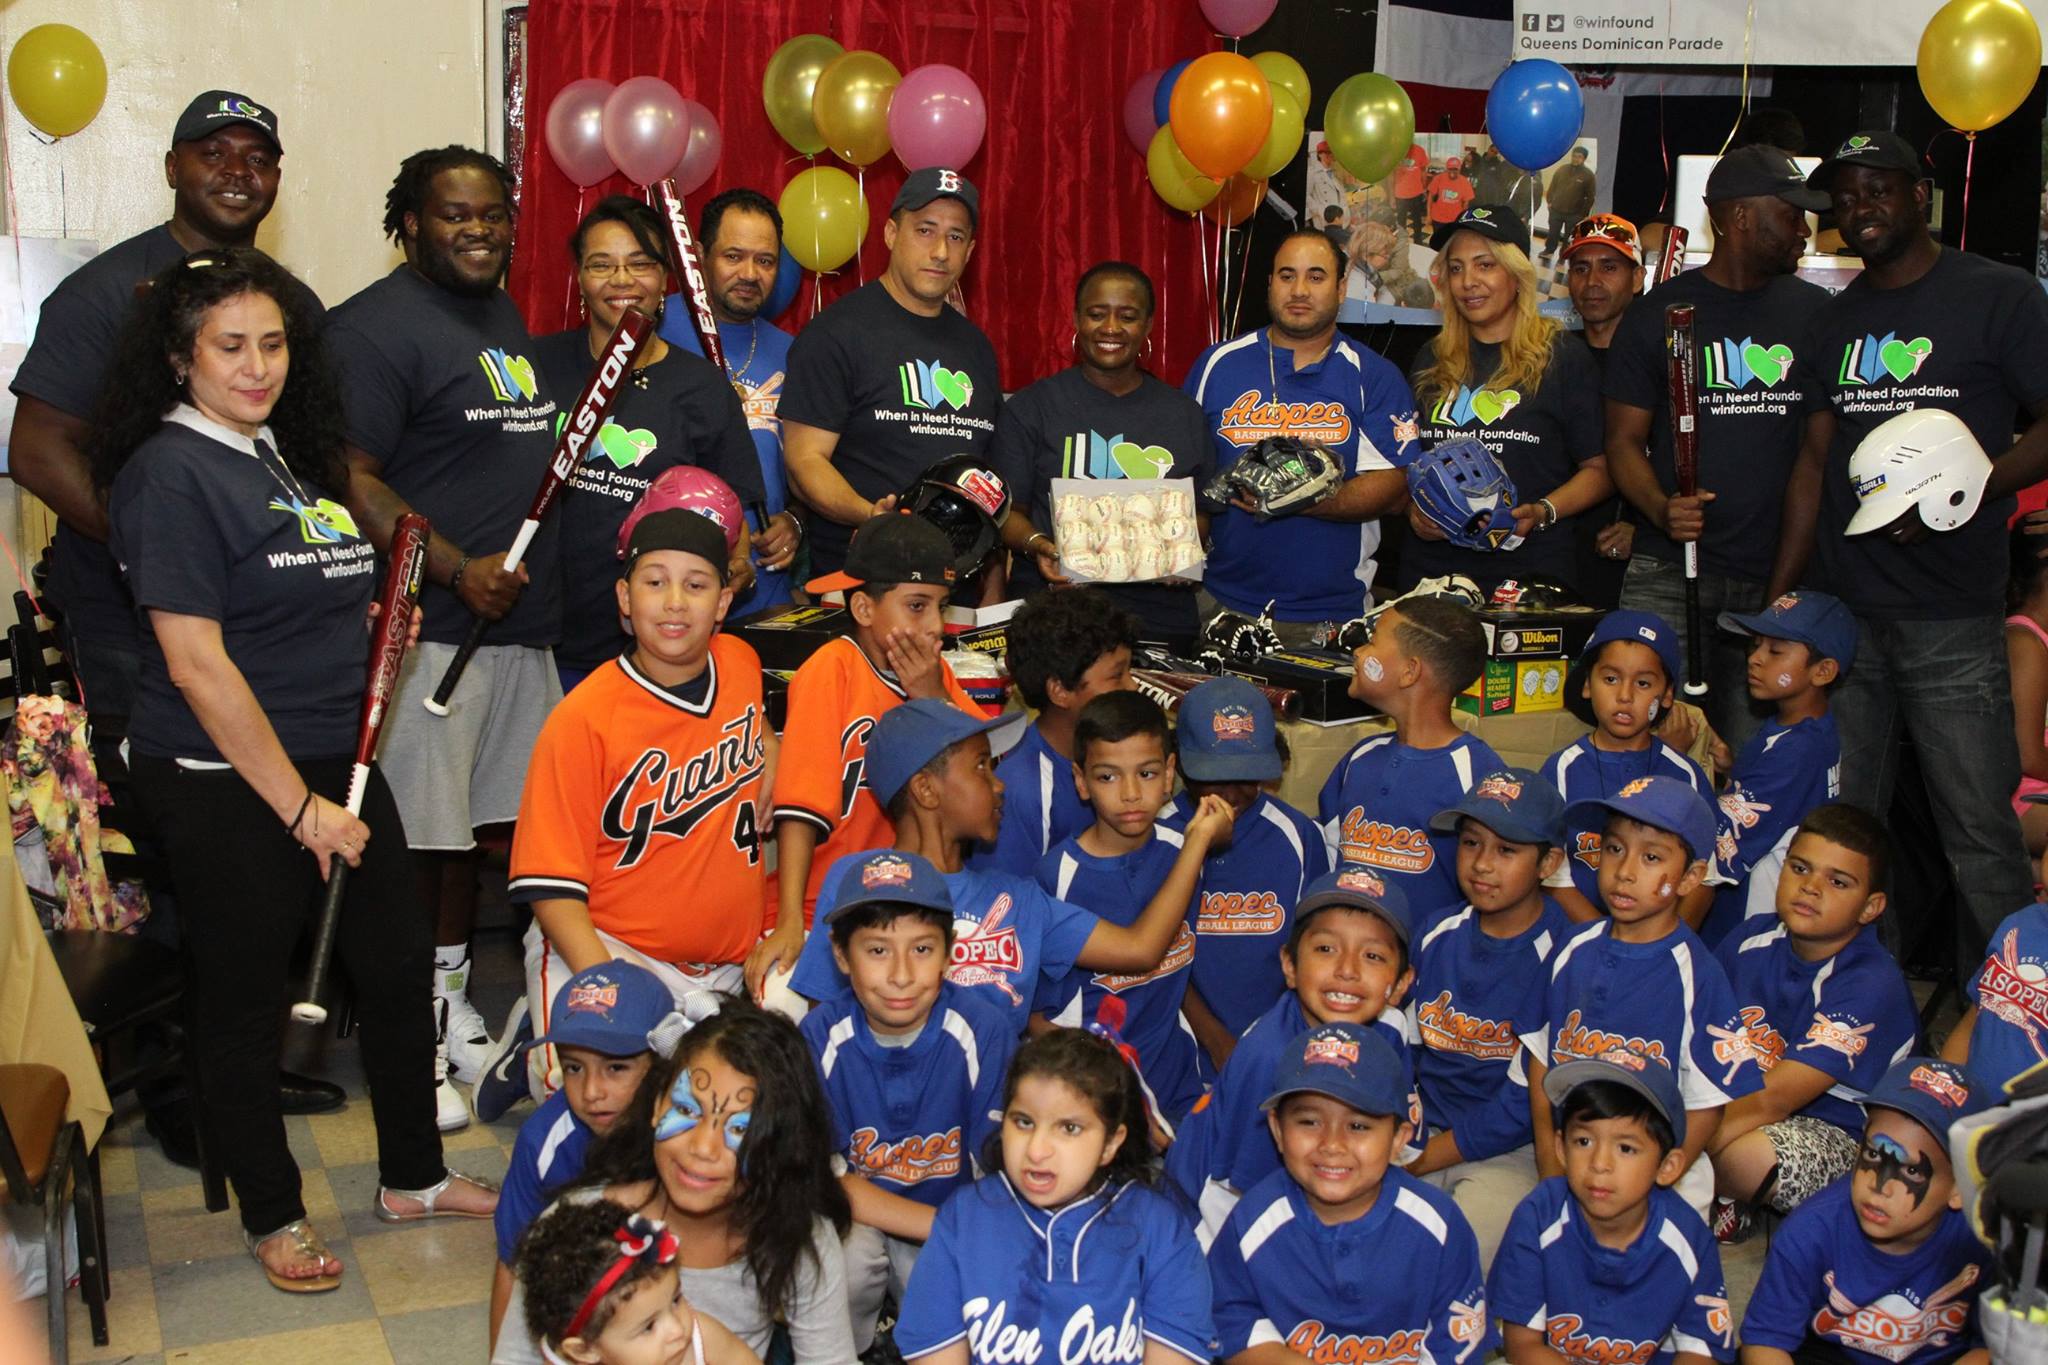 When In Need gives sporting gear to Youth Baseball Team